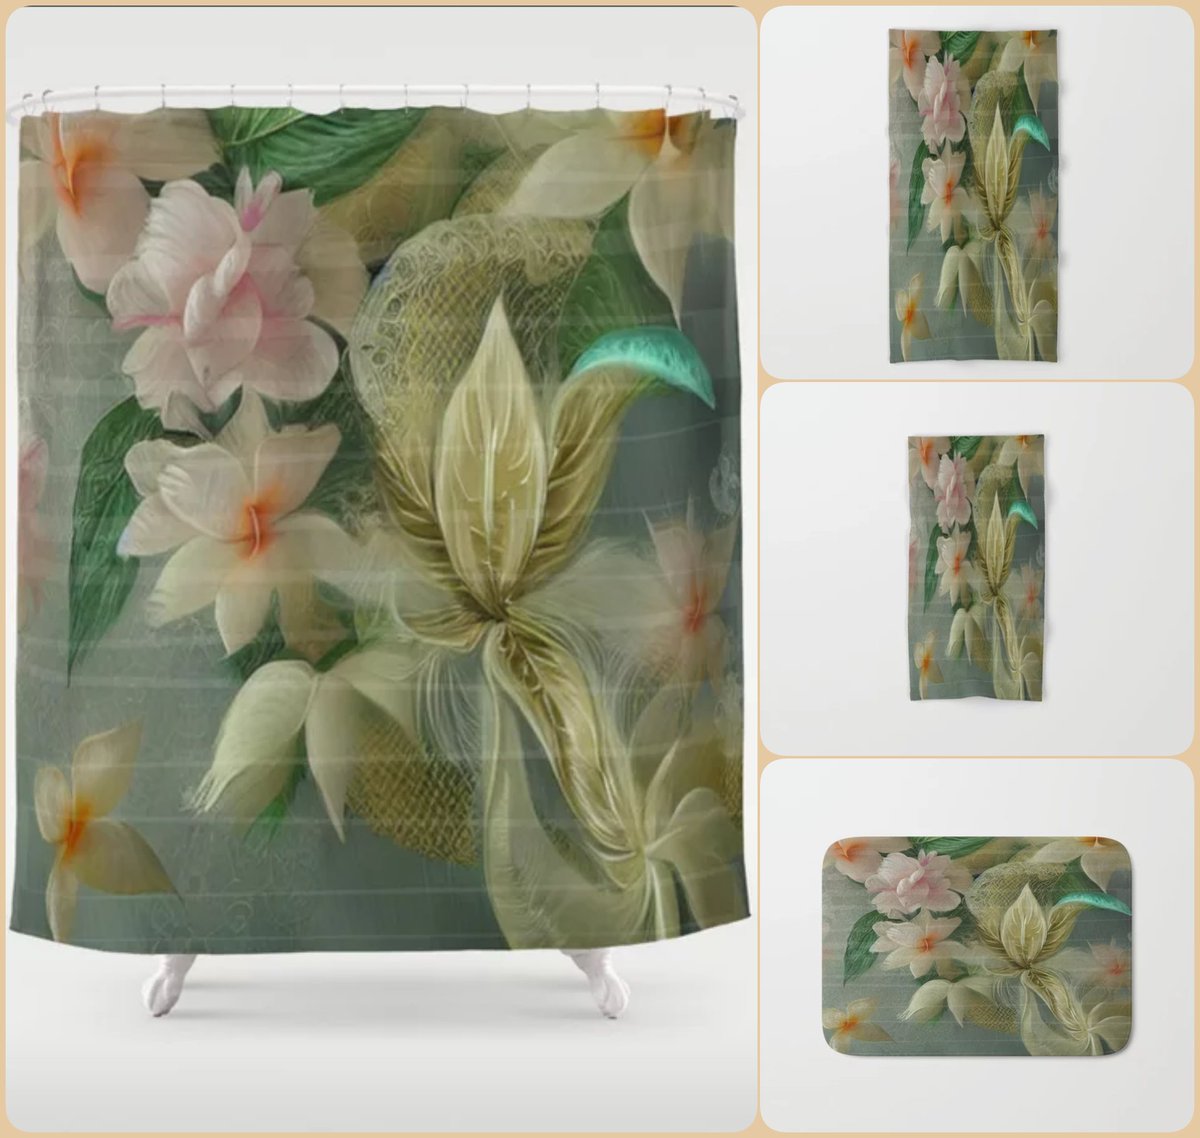 Decadent Ambiance Shower Curtain ~Refresh your Decor~ #artfalaxy #art #bedroom #pillows #homedecor #society6 #Society6max #swirls #modern #trendy #accessories #accents #shower #bath #comforters #duvets #blankets #shams society6.com/product/decade…